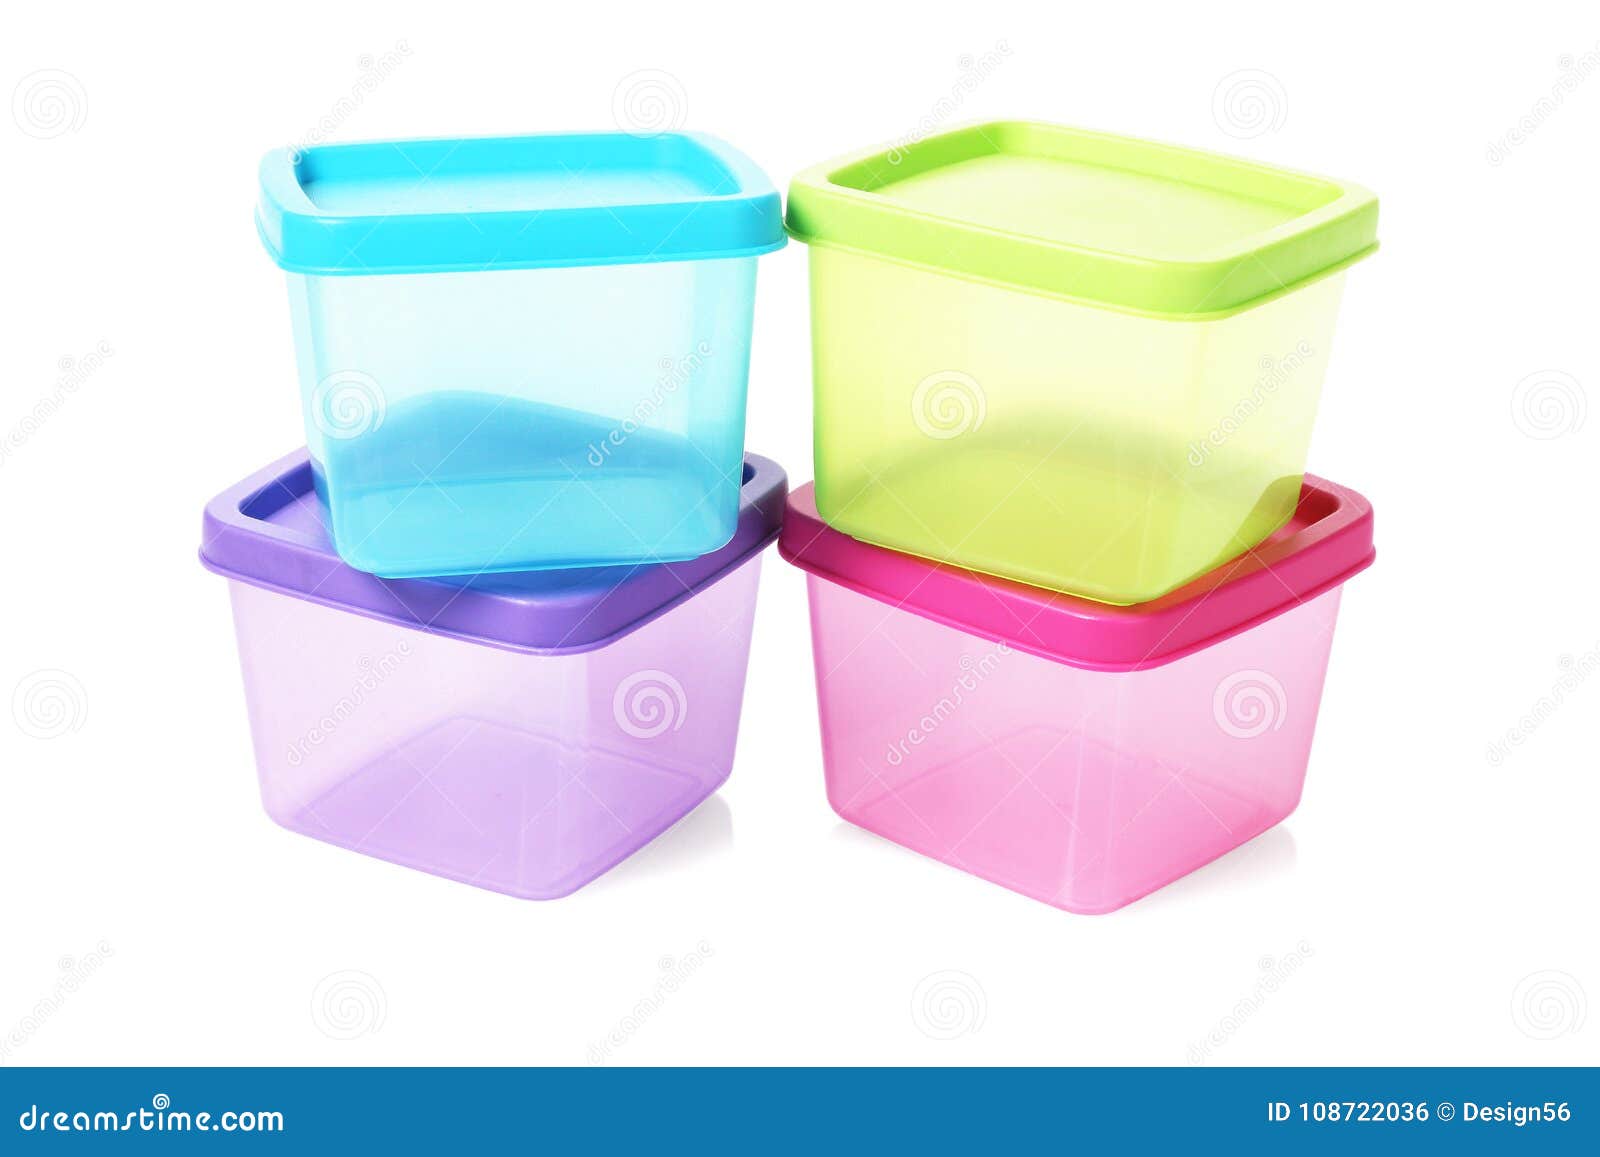 Colourful Square Plastic Containers Stock Photo Image of